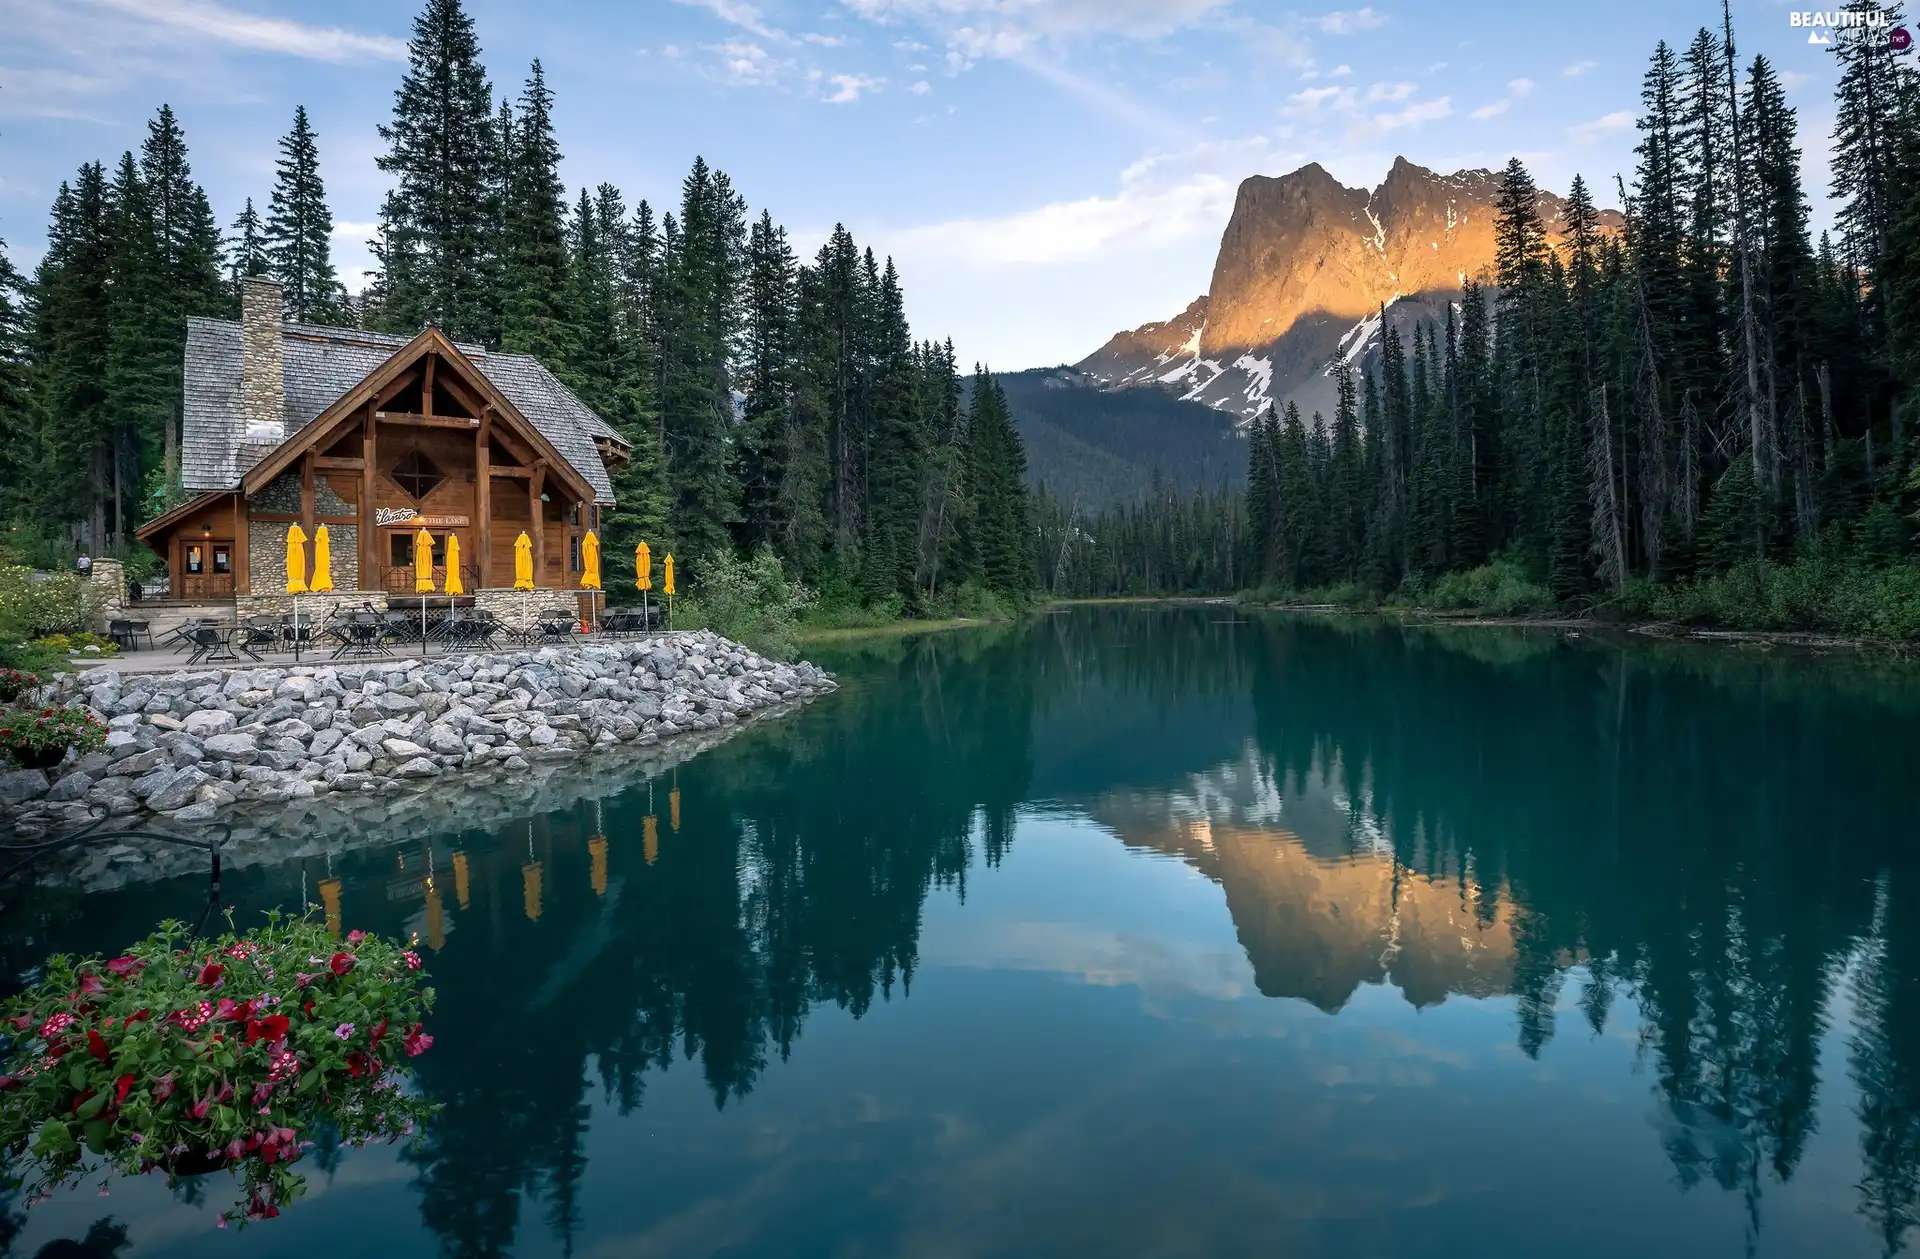 Emerald Lake, trees, Canada, viewes, Province of British Columbia, Mountains, Yoho National Park, house